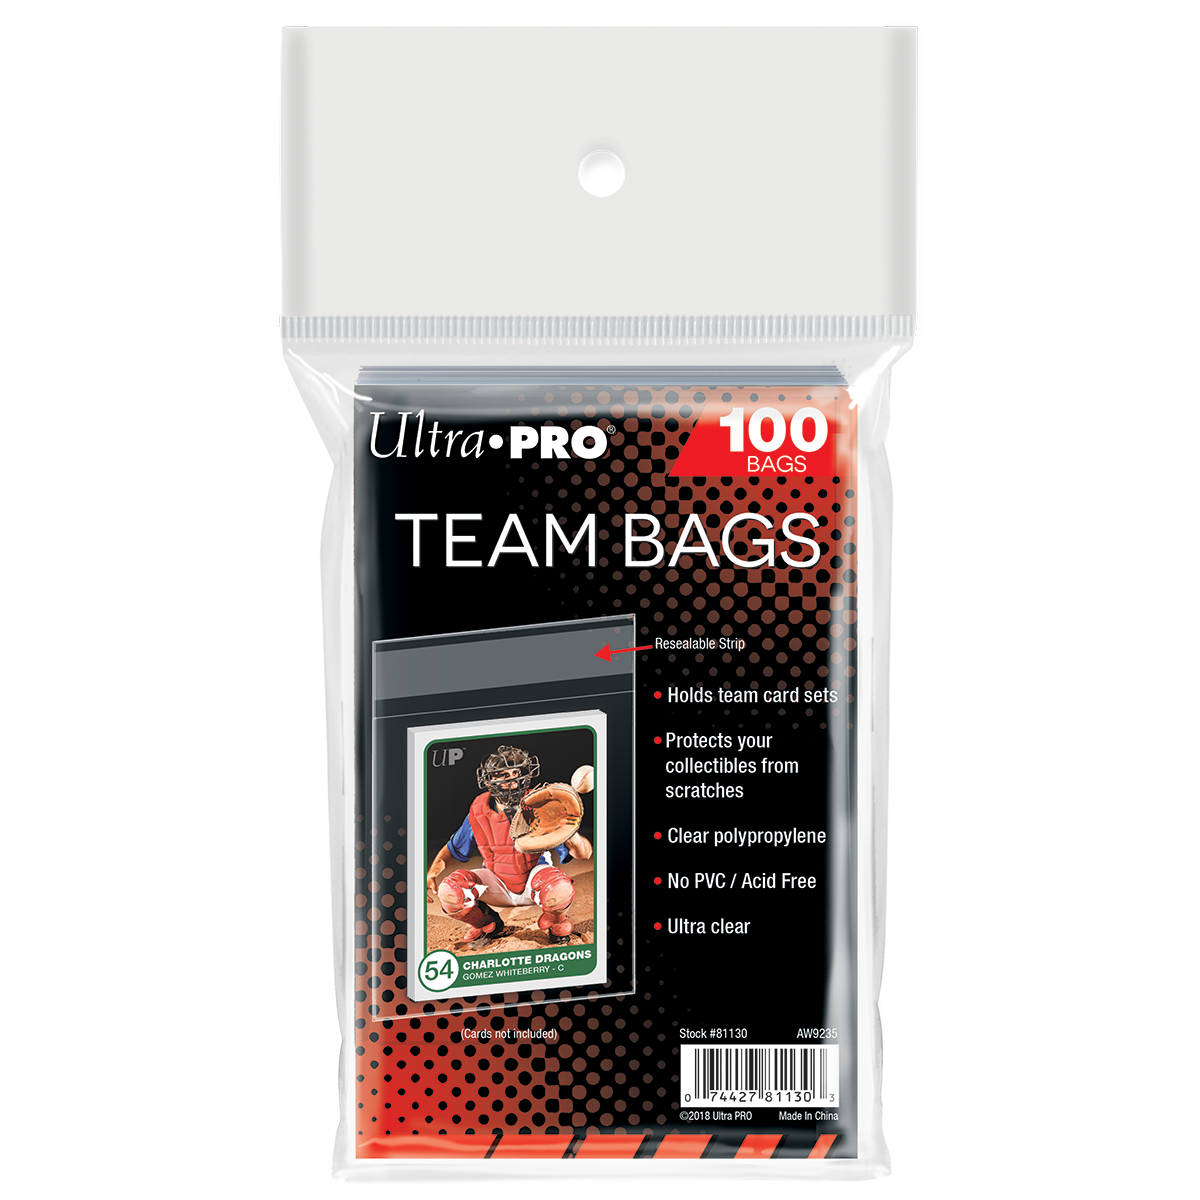 Ultra Pro Team Bags Sleeves 20 Packs of 100 for Team Sets or Toploaders 